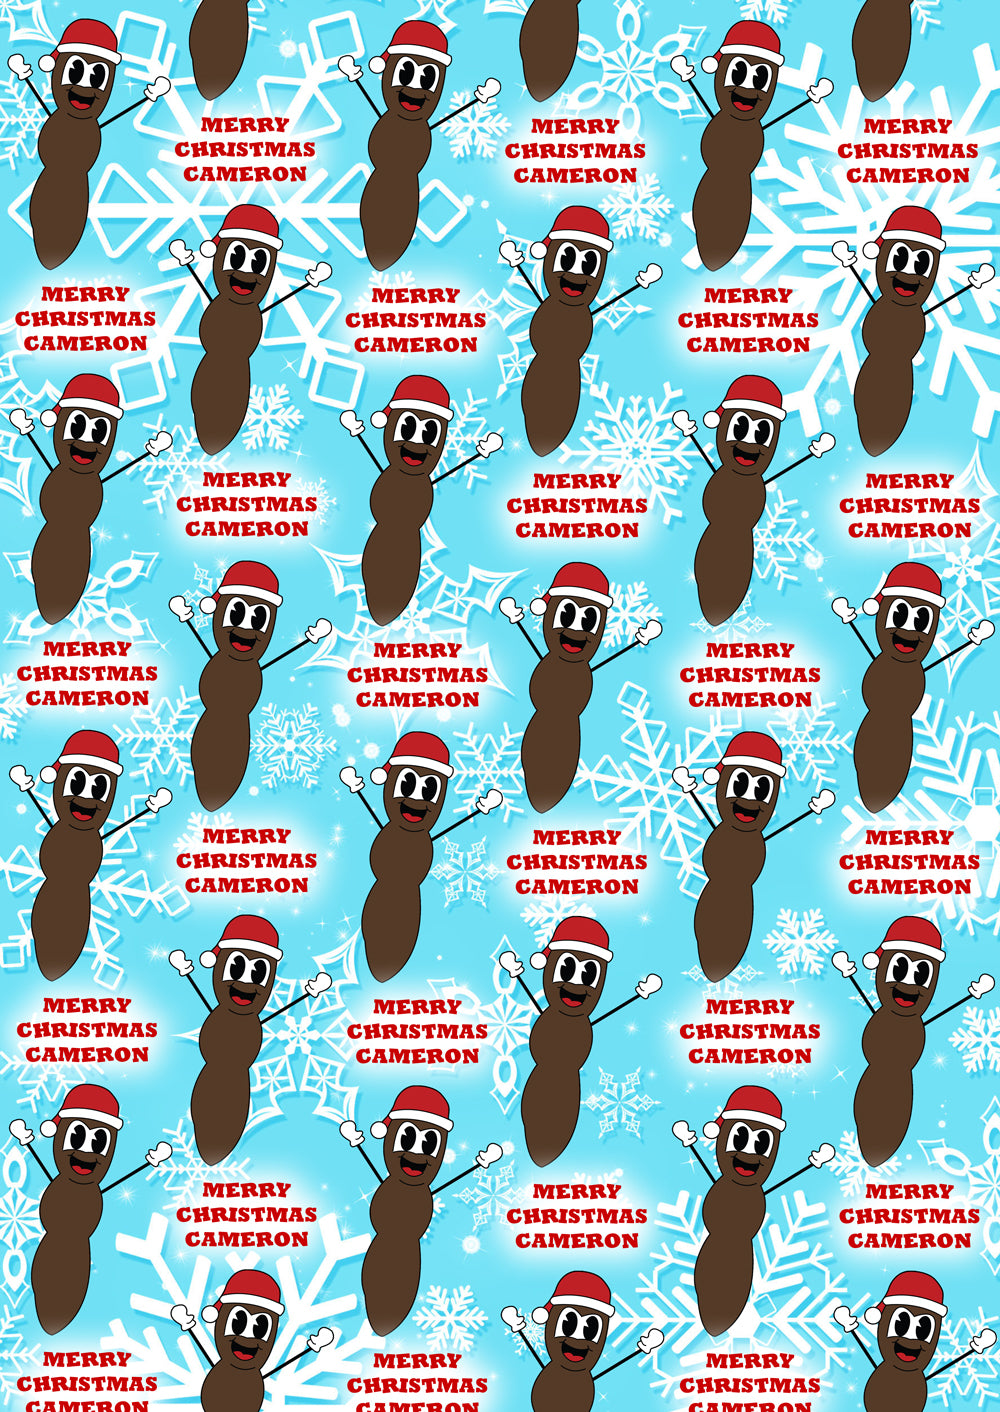 MR HANKEY SOUTH PARK Personalised Christmas Wrapping Paper